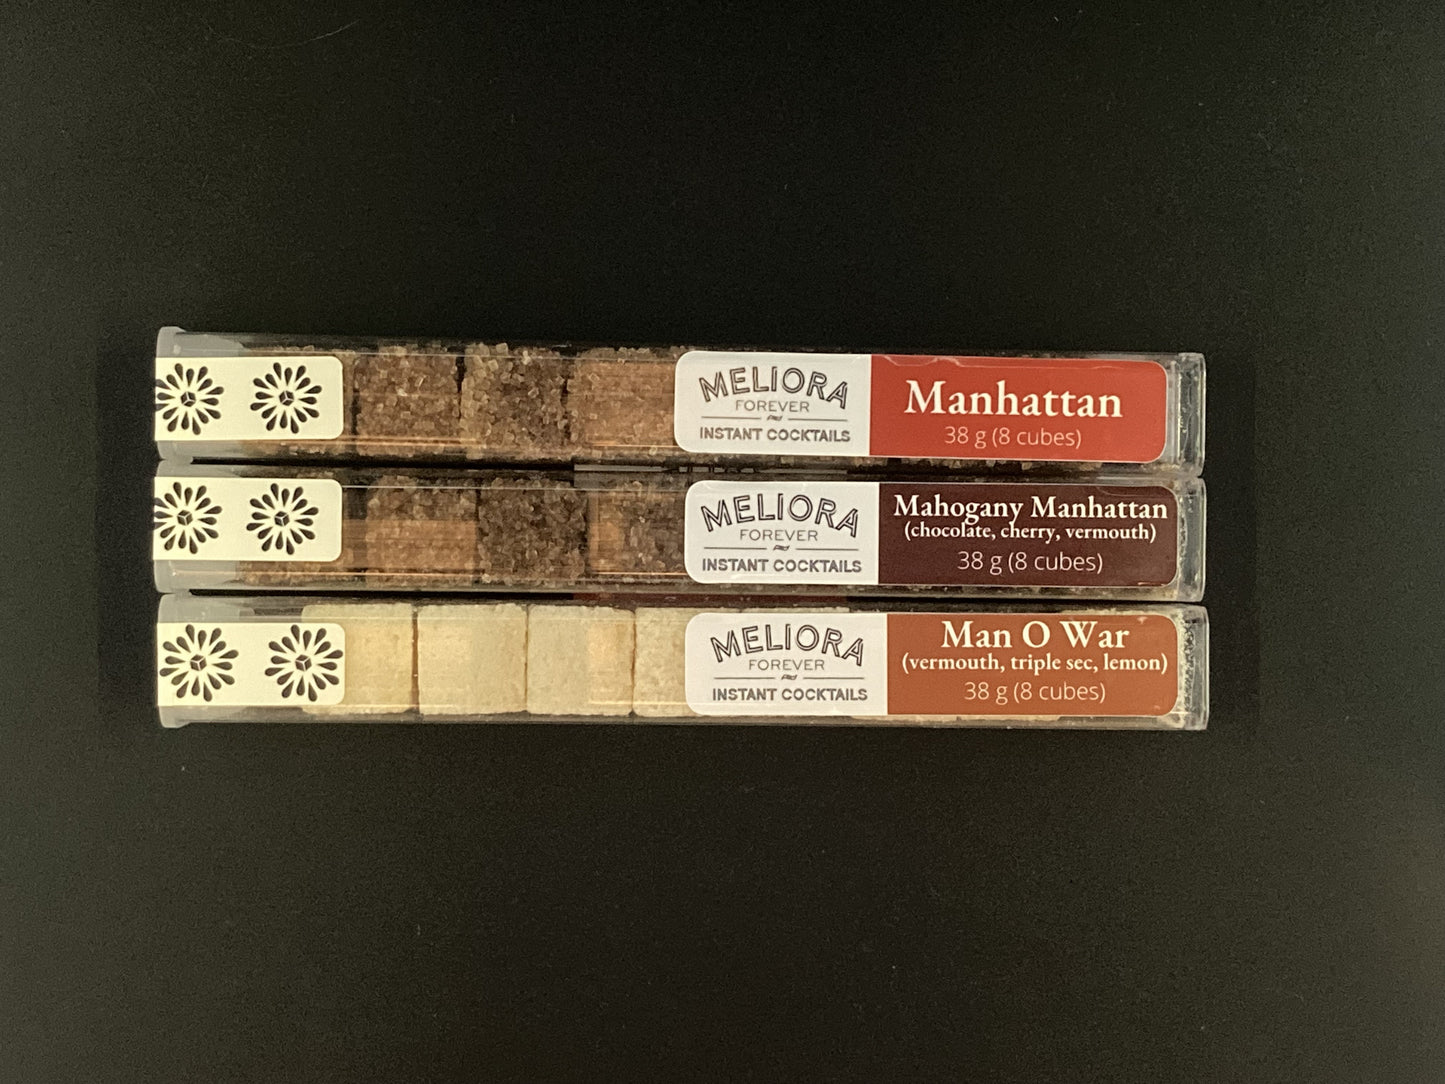 Whiskey & Vermouth Cocktails Variety Pack